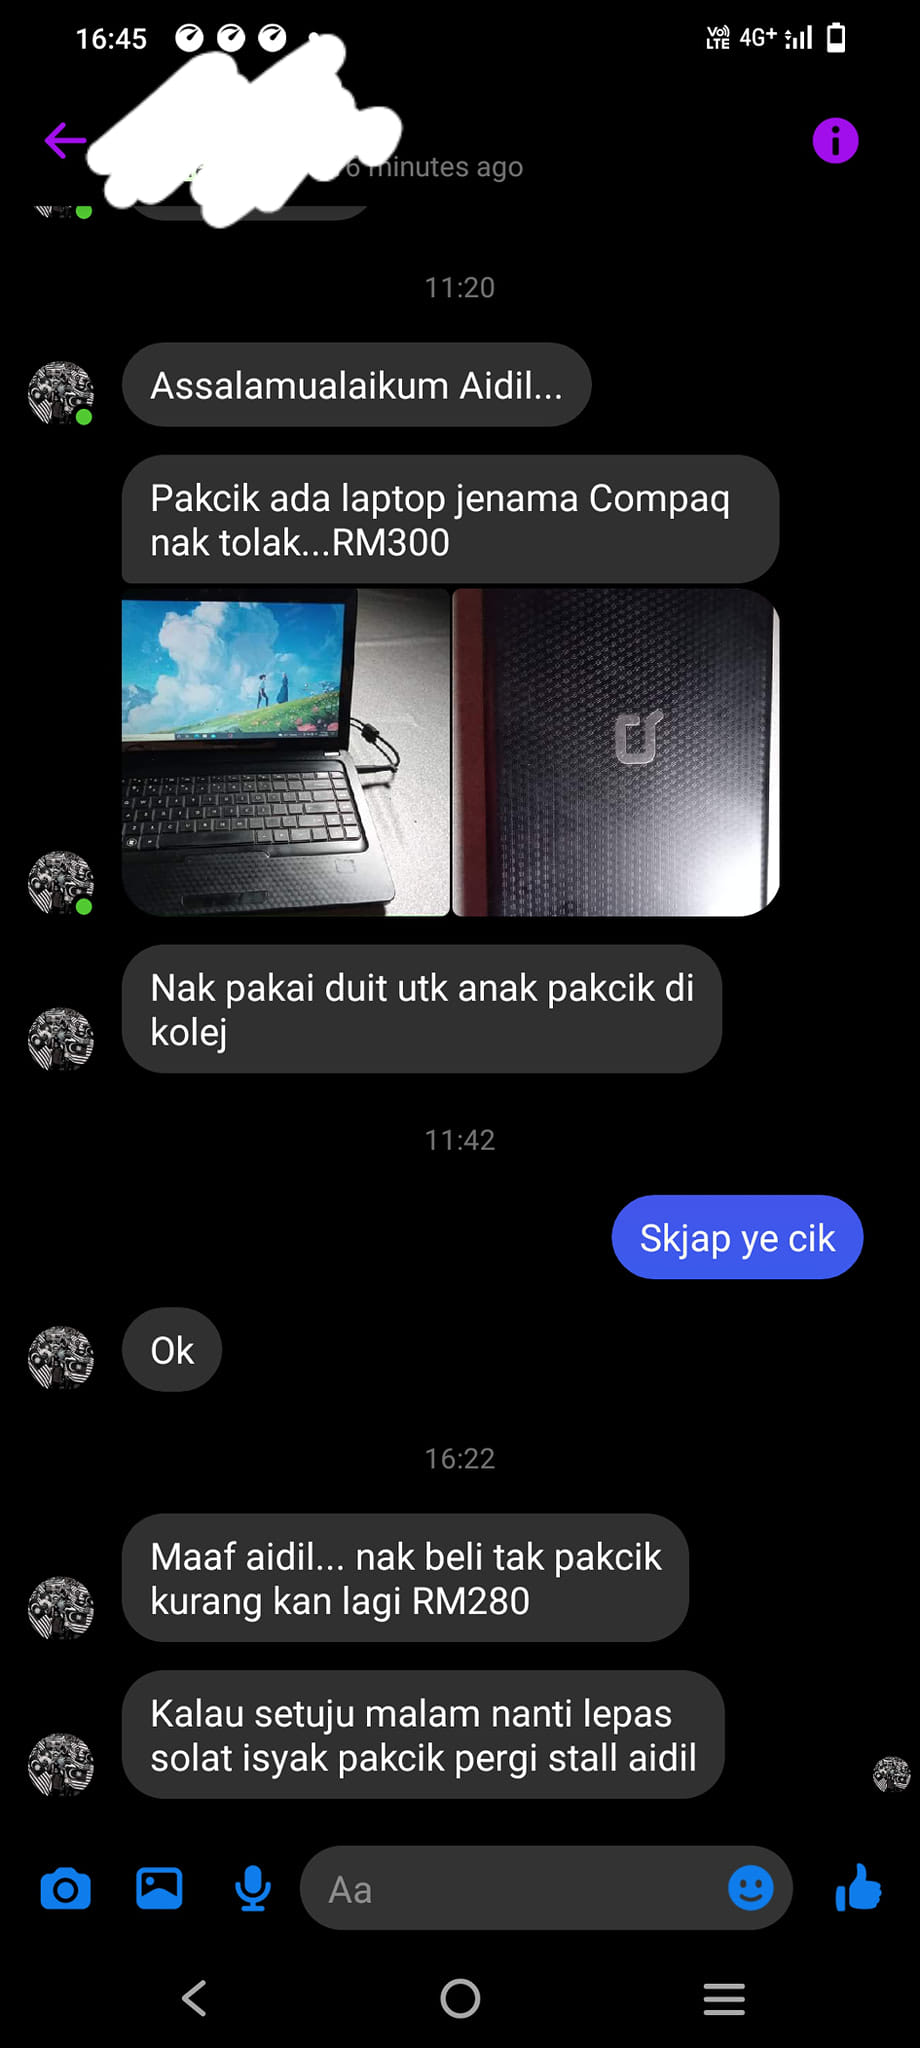 Father selling laptop for rm300 to save for child college fees